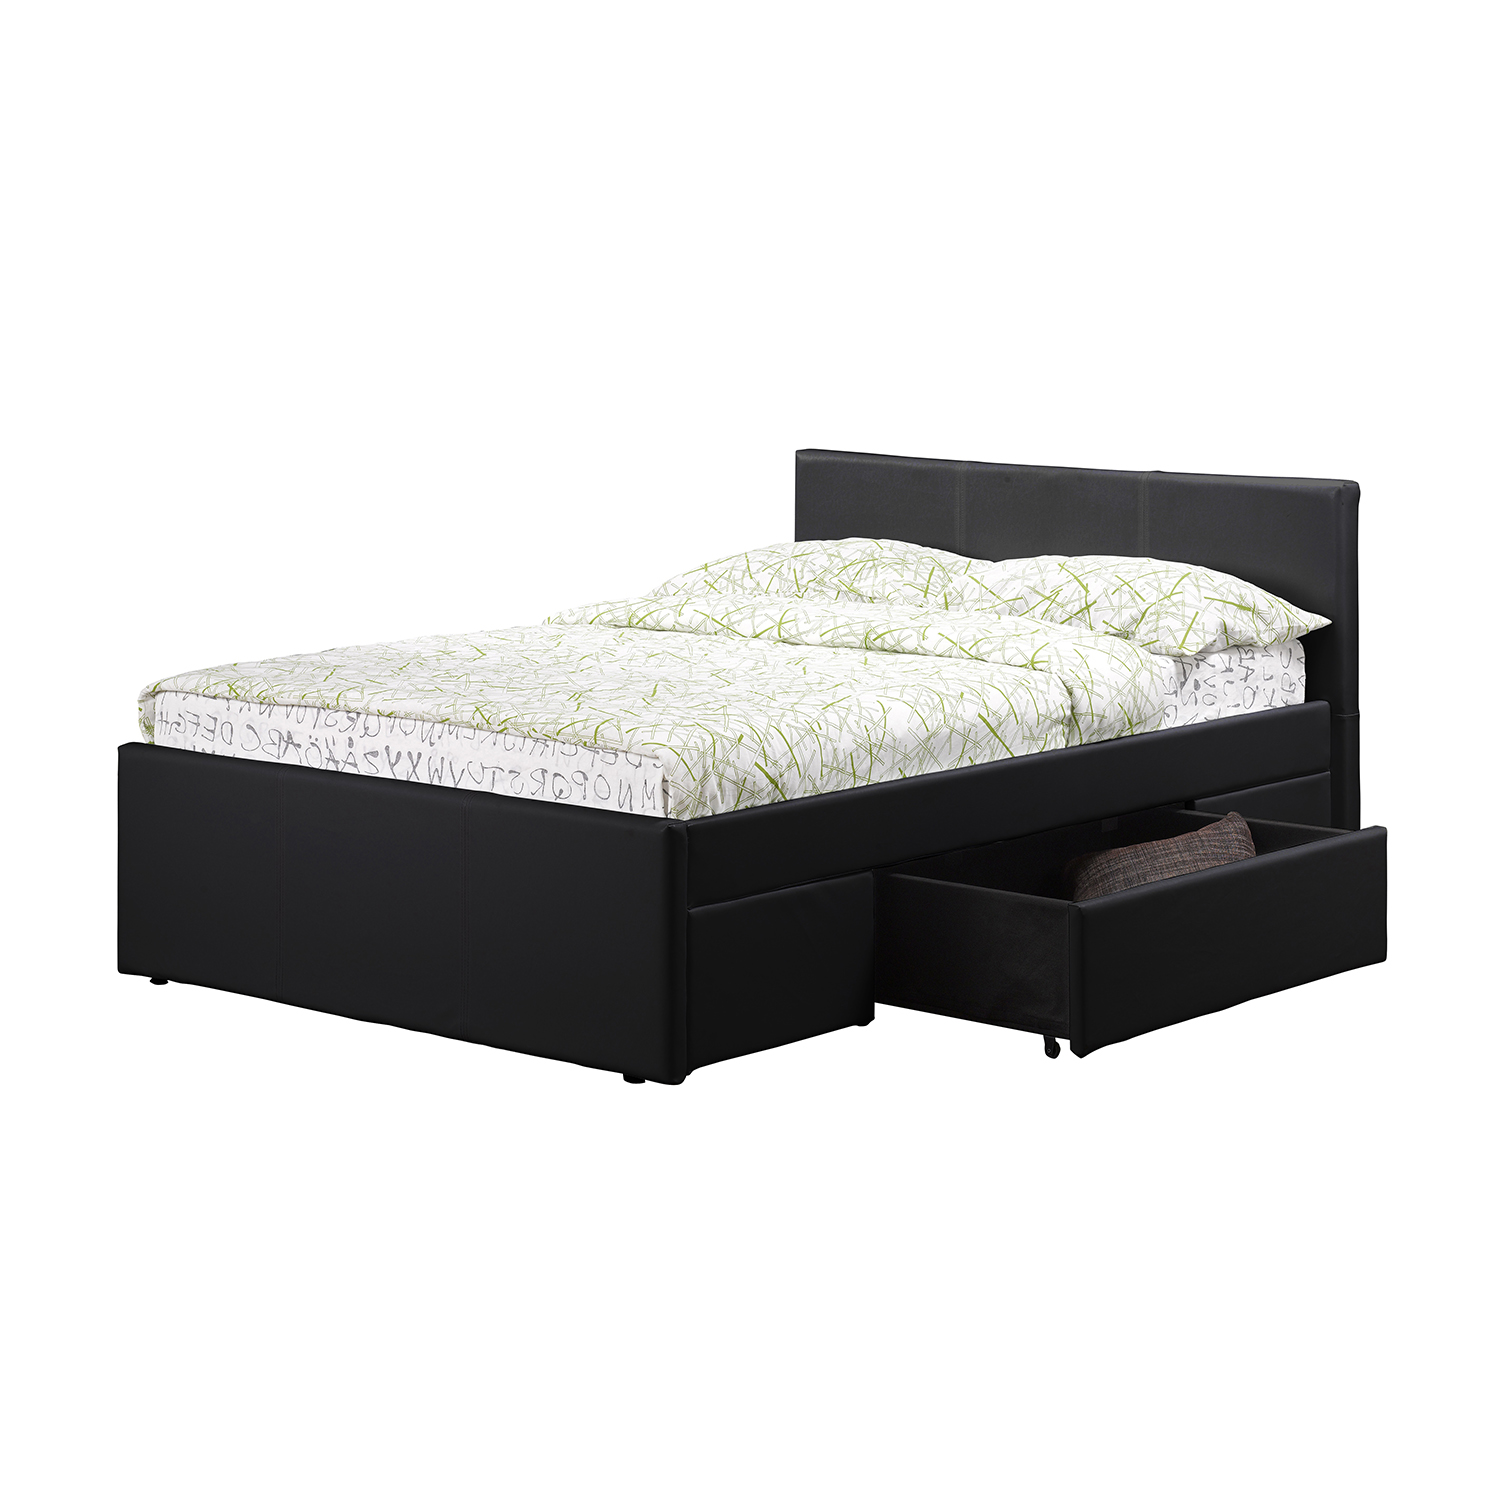 Faith Faux Leather Storage Bed Frame, Faux Leather Bed Frame